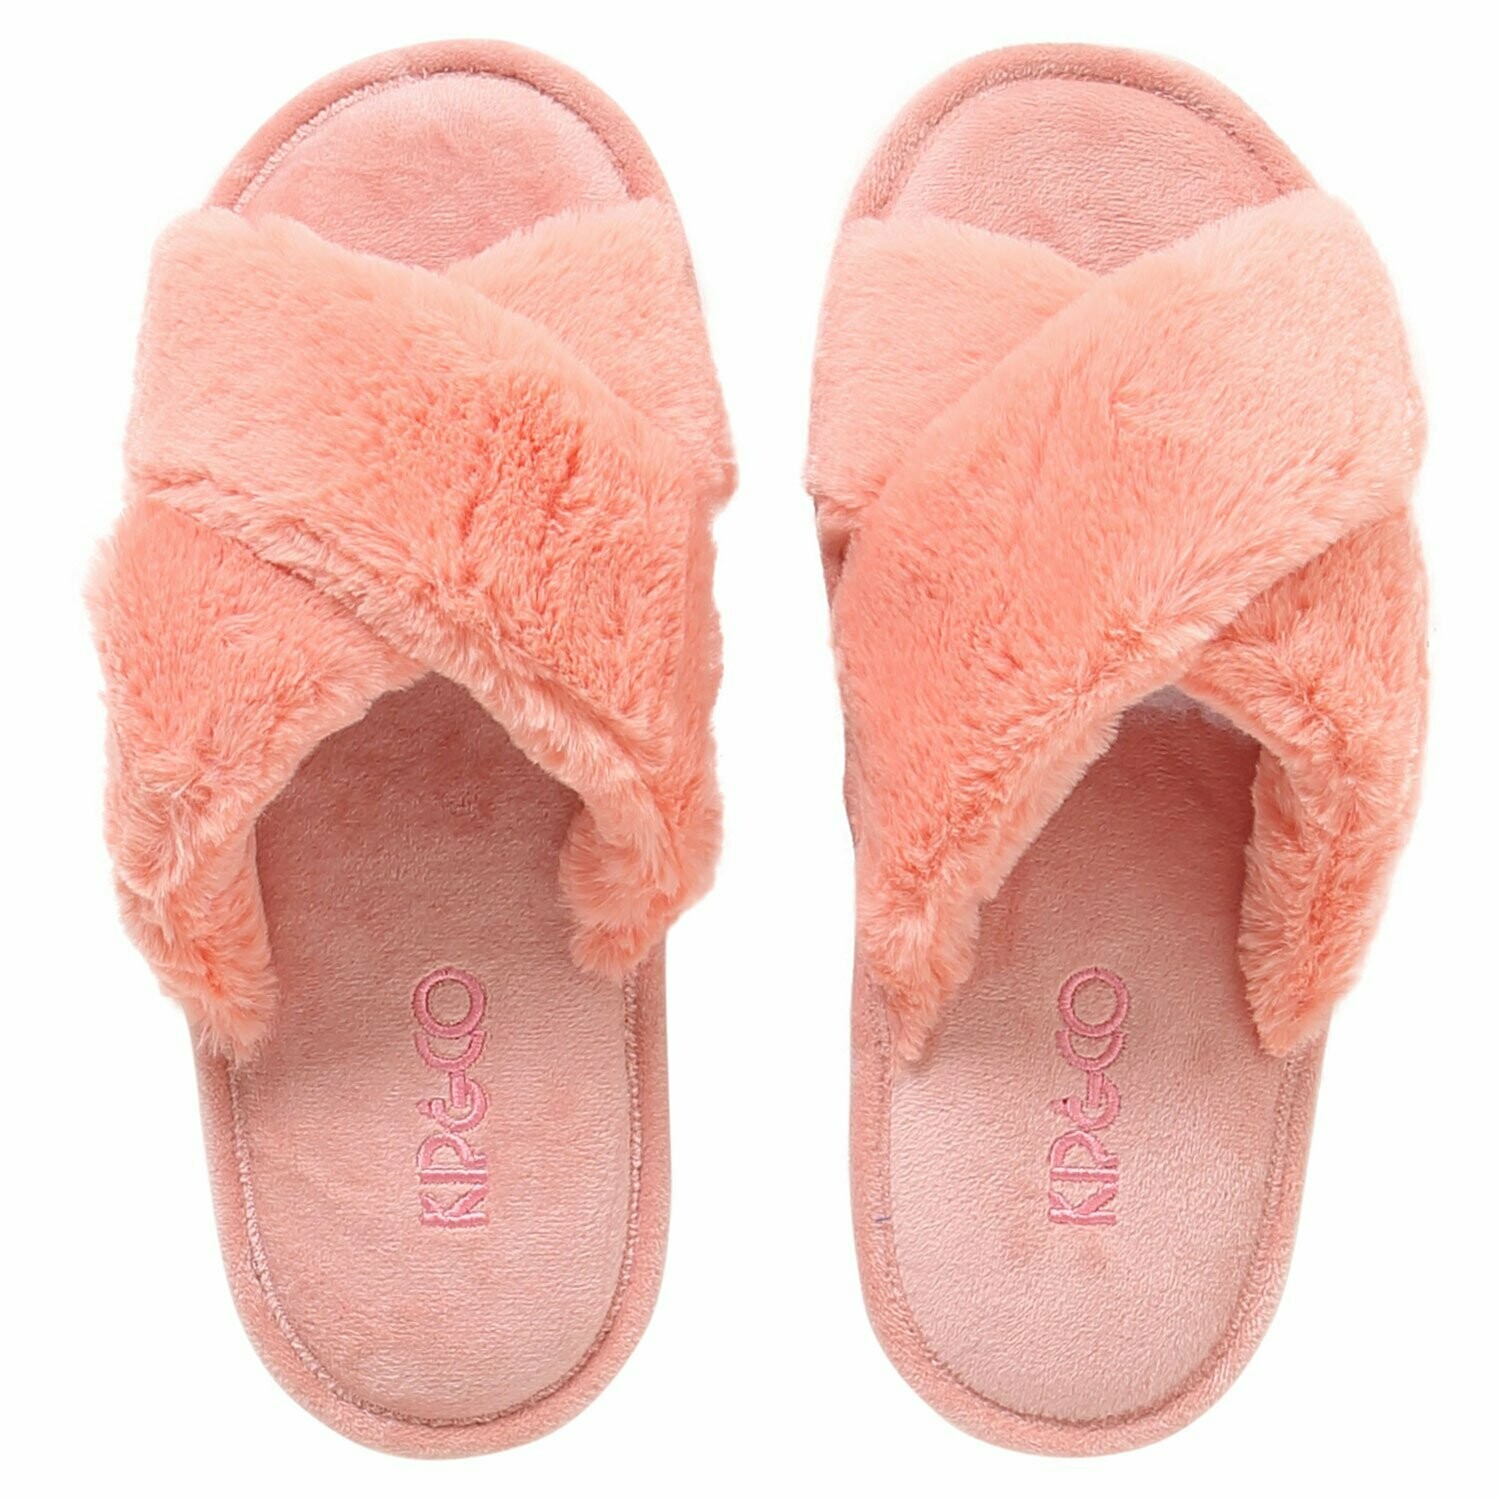 Adult Slippers - Blush Pink - Size 35/36